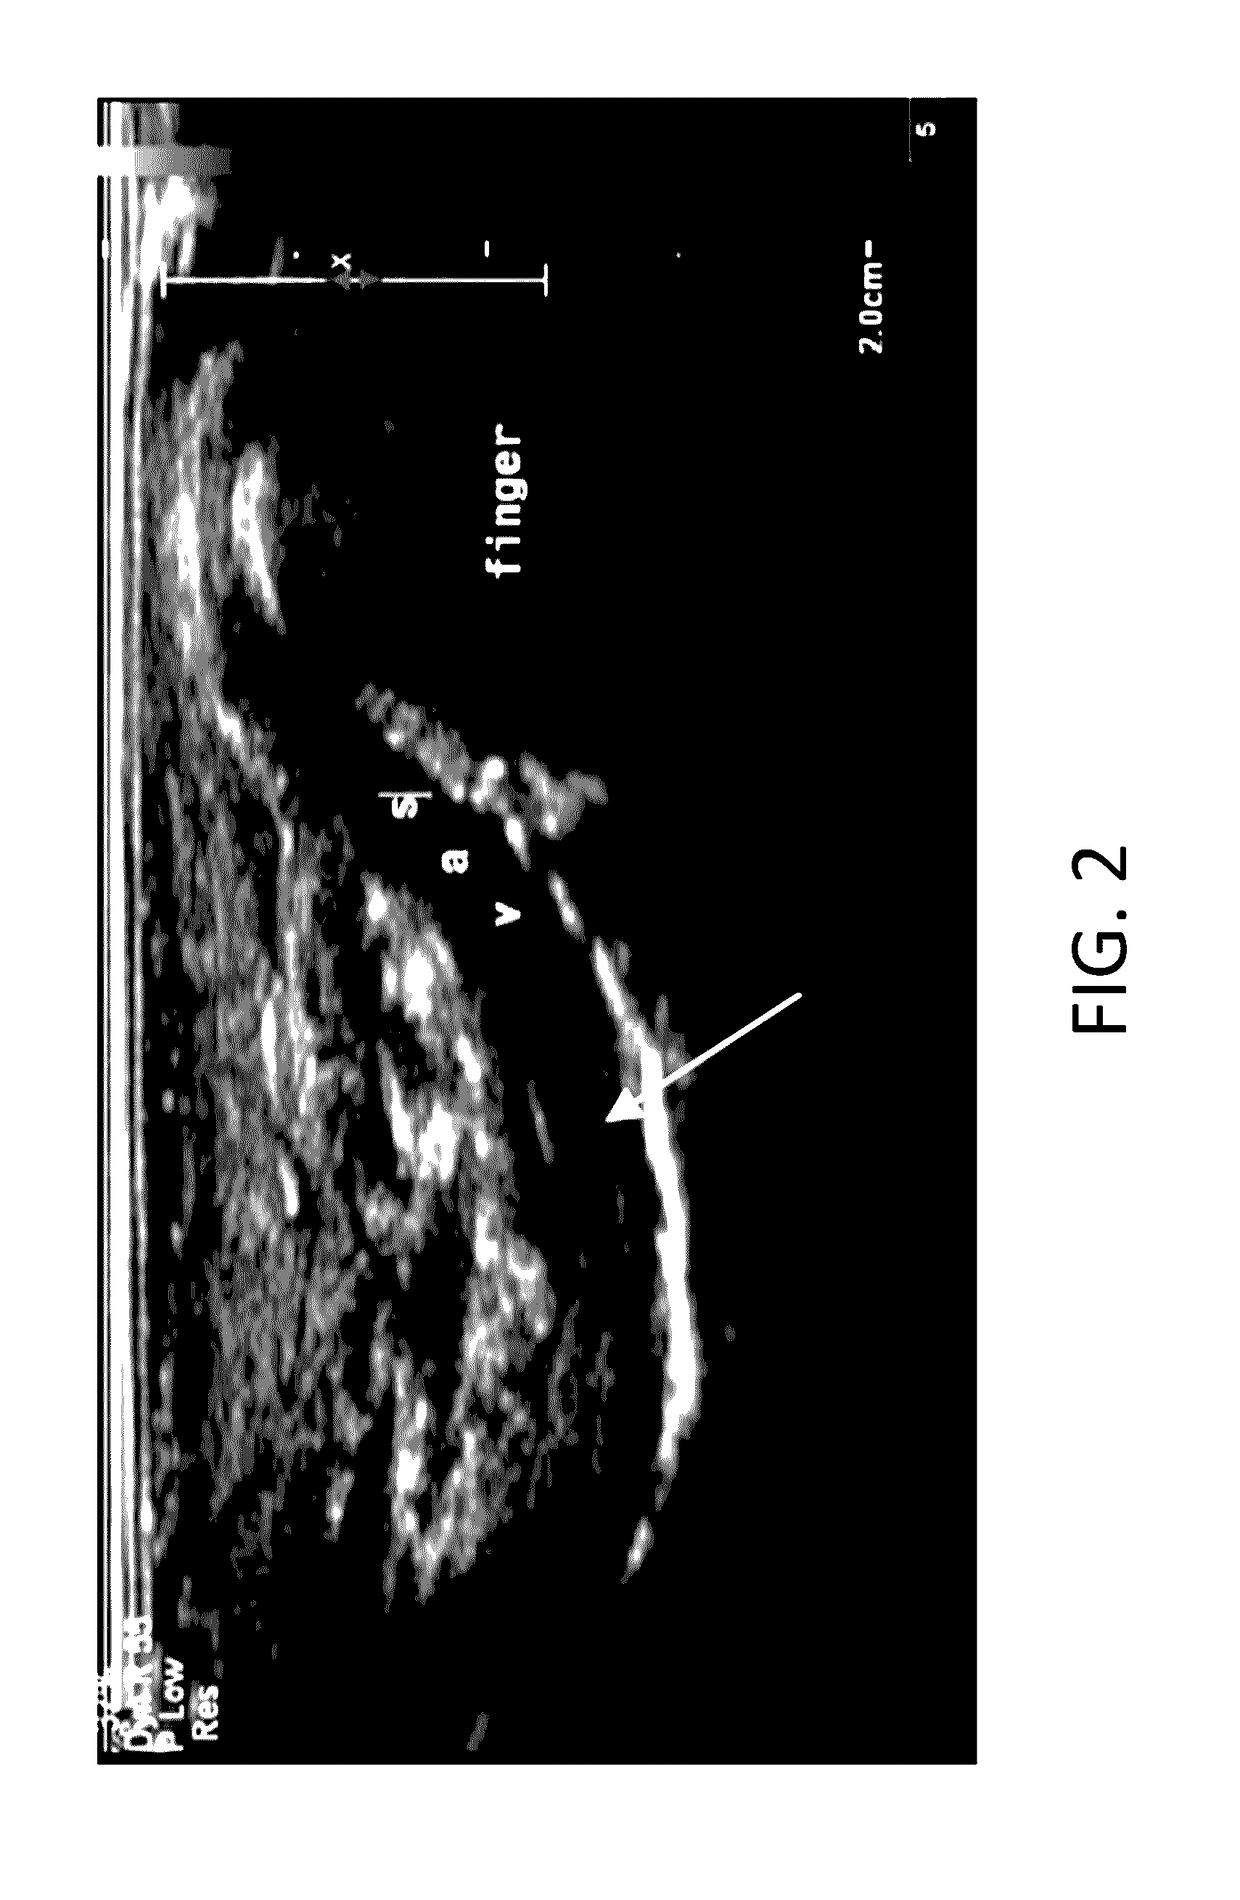 Compositions and methods for vas-occlusive contraception